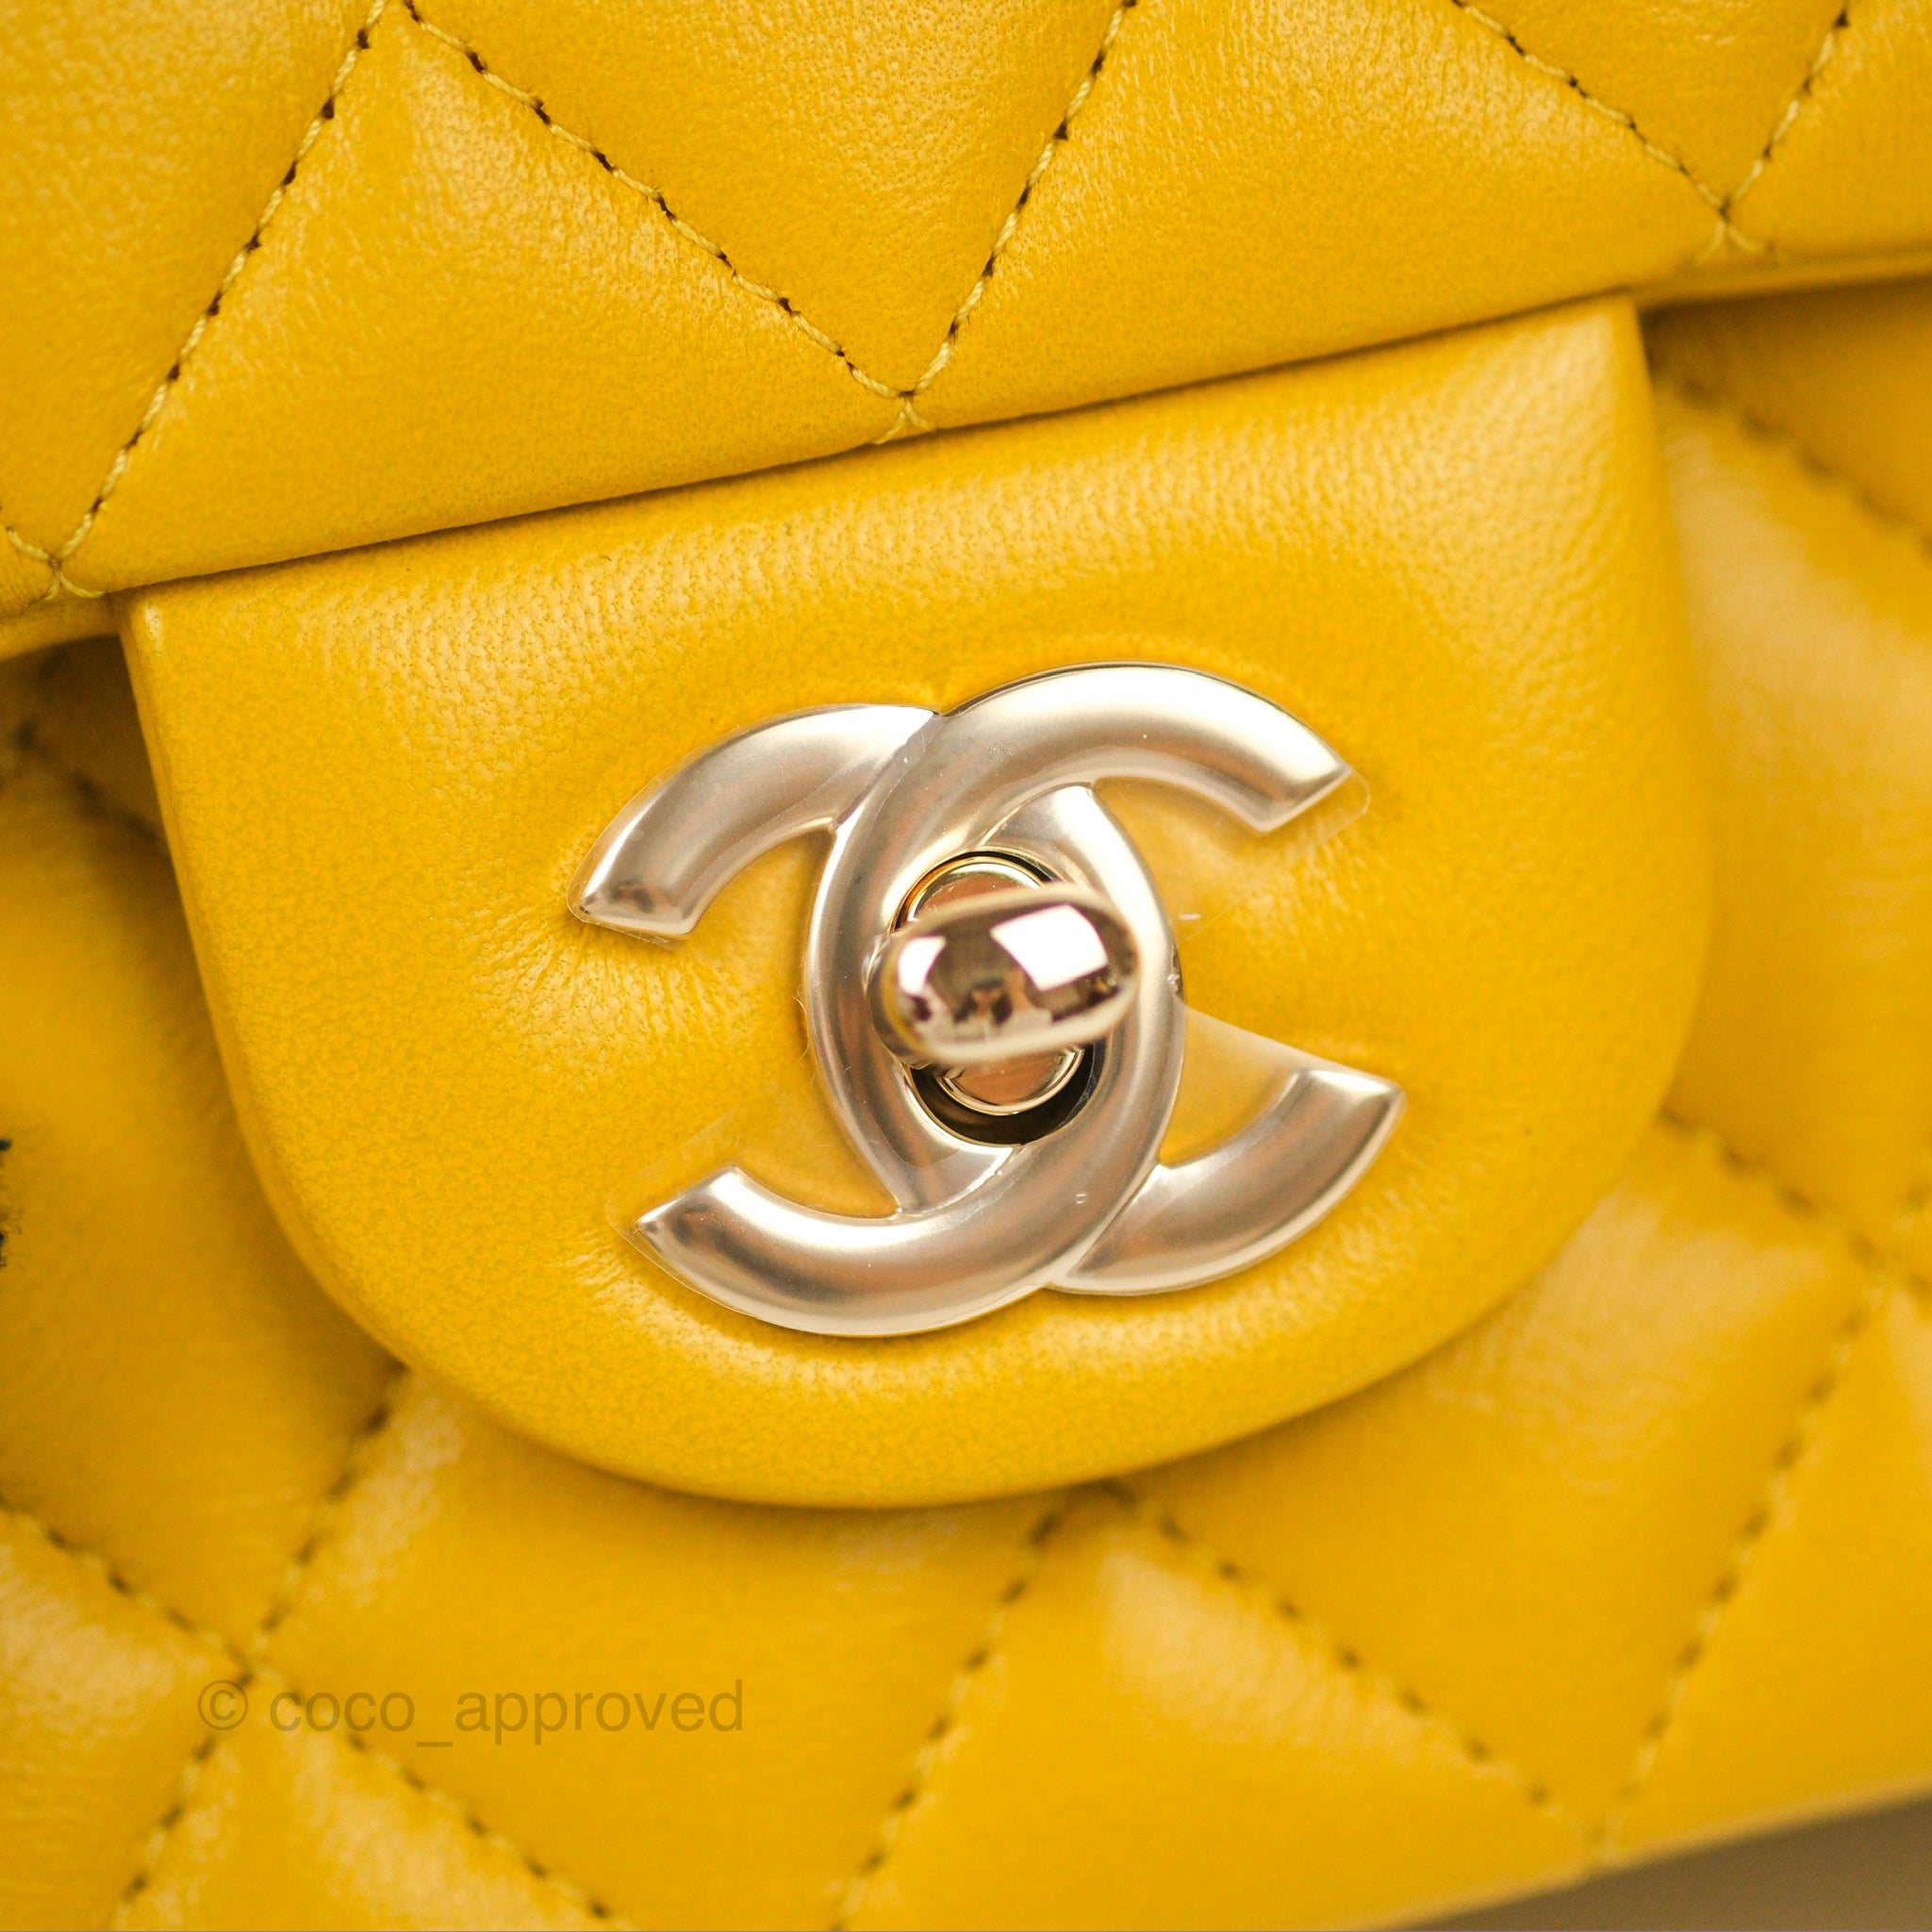 small gold chanel bag